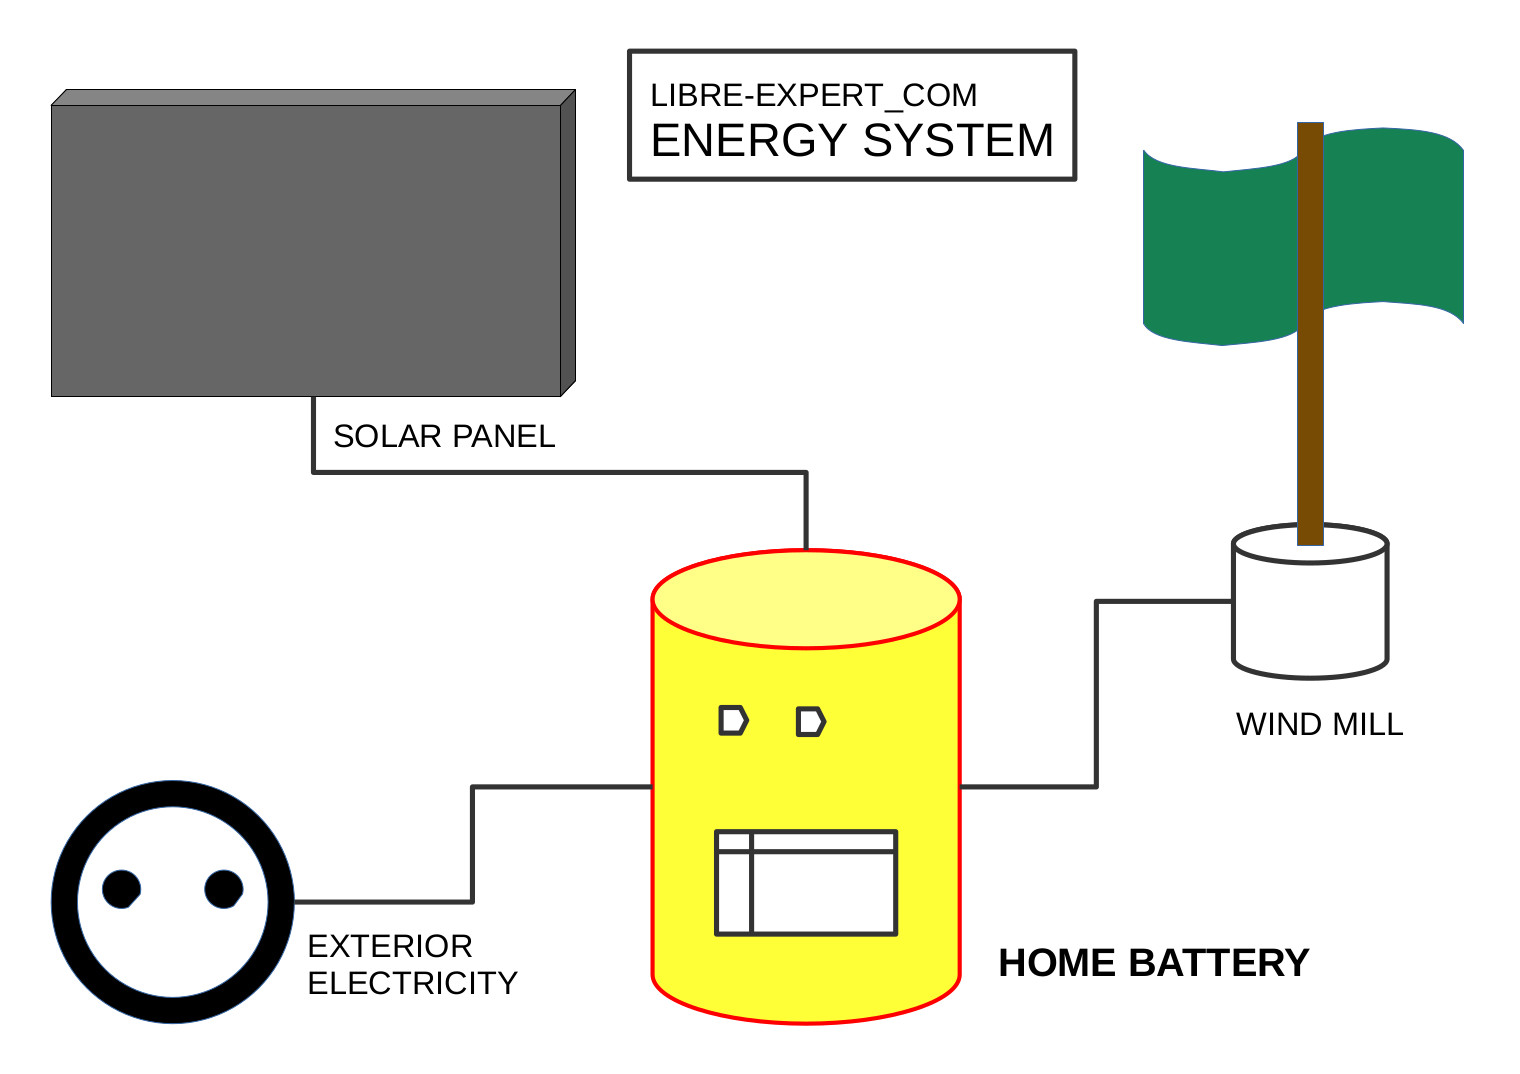 A HOME BATTERY